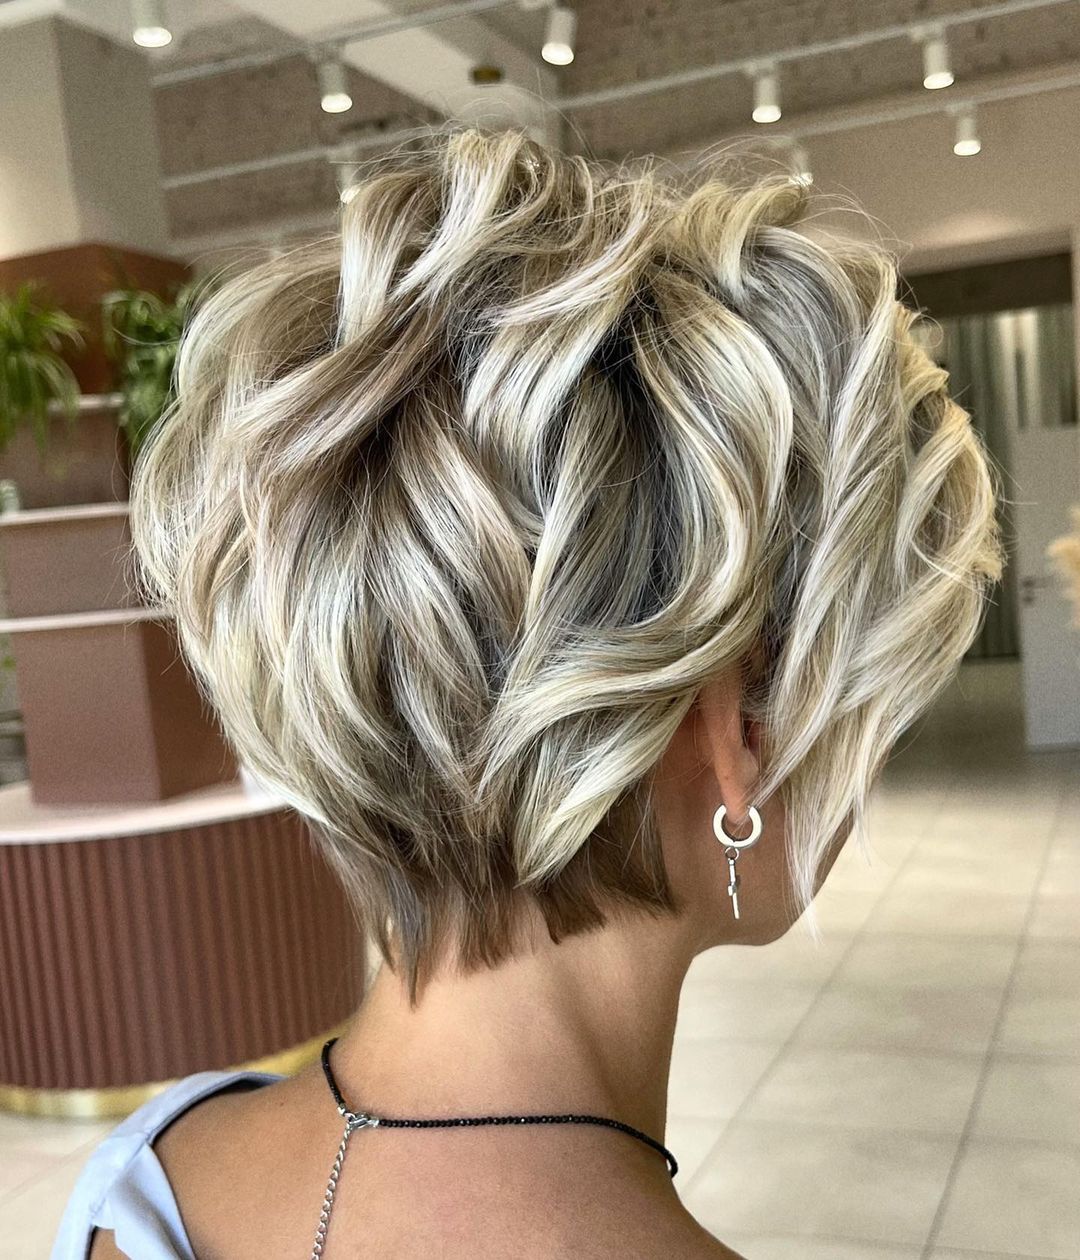 Blonde haircuts: 16 spectacular and trendy examples